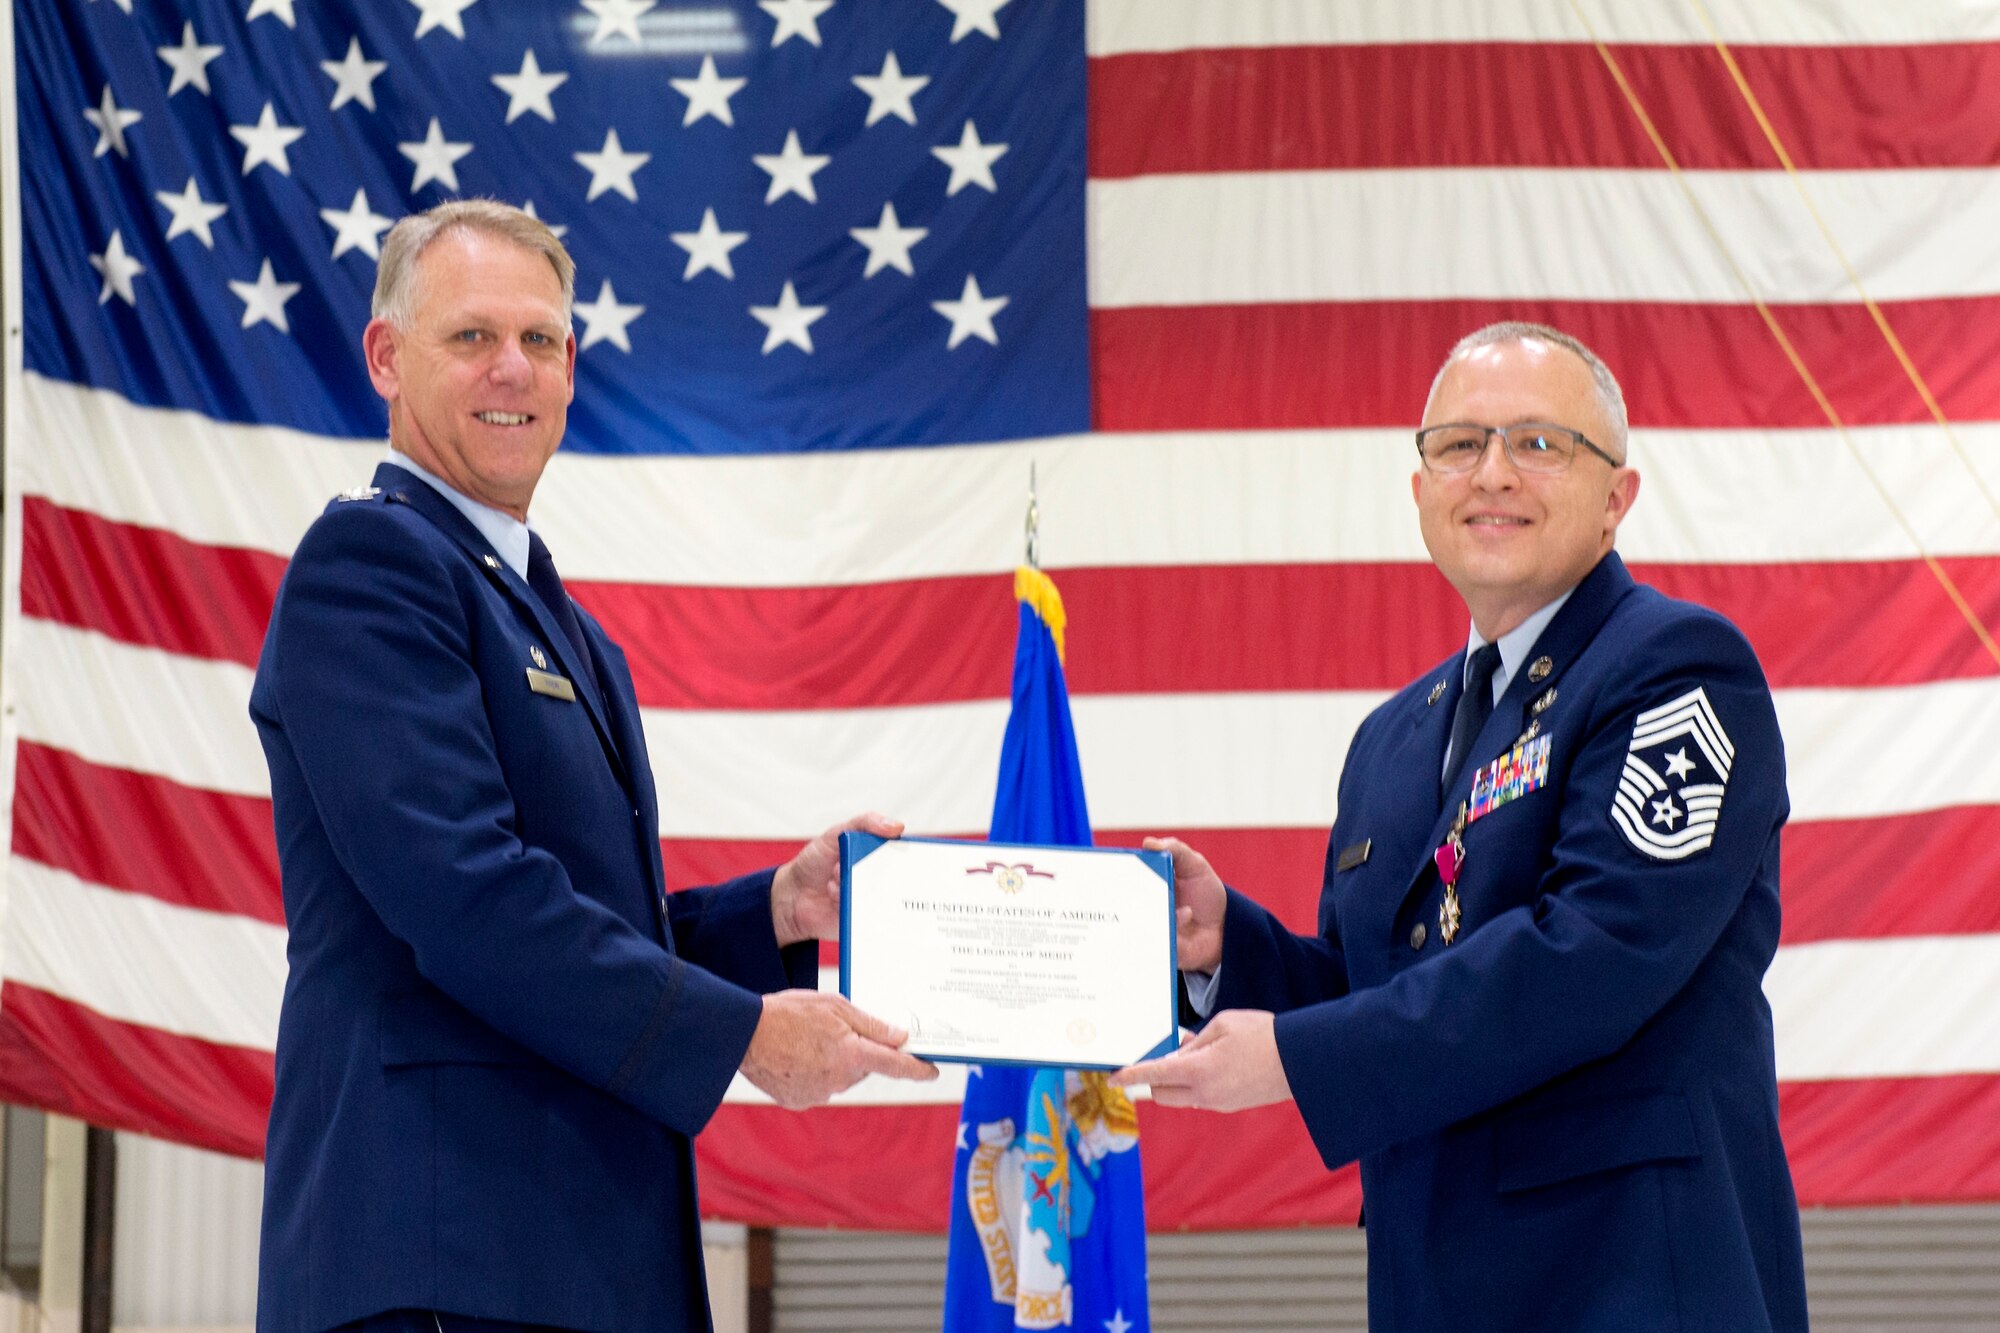 Col. Larry Shaw, 434th Air Refueling Wing commander, presents Chief Master Sgt. Wes Marion, 434th ARW command chief, with his certificate of retirement during his retirement ceremony at Grissom Air Reserve Base, Ind., Nov. 8, 2020. Marion became Grissom’s command chief in 2016. (U.S. Air Force photo/Master Sgt. Ben Mota)